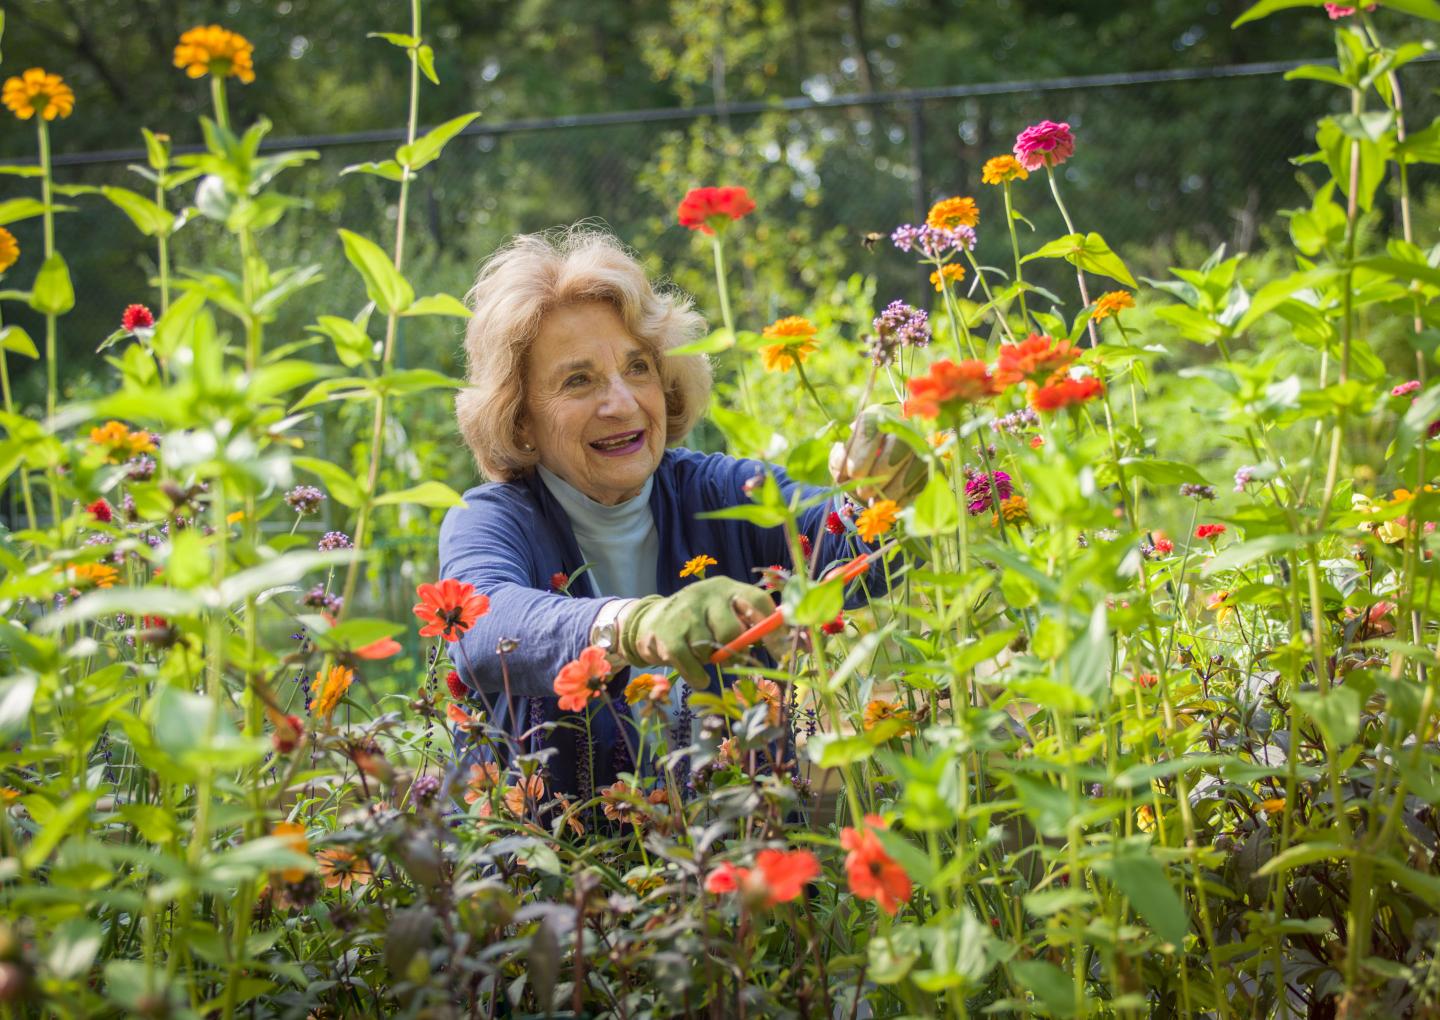 A resident of Orchard Cove cuts wildflowers from her garden.